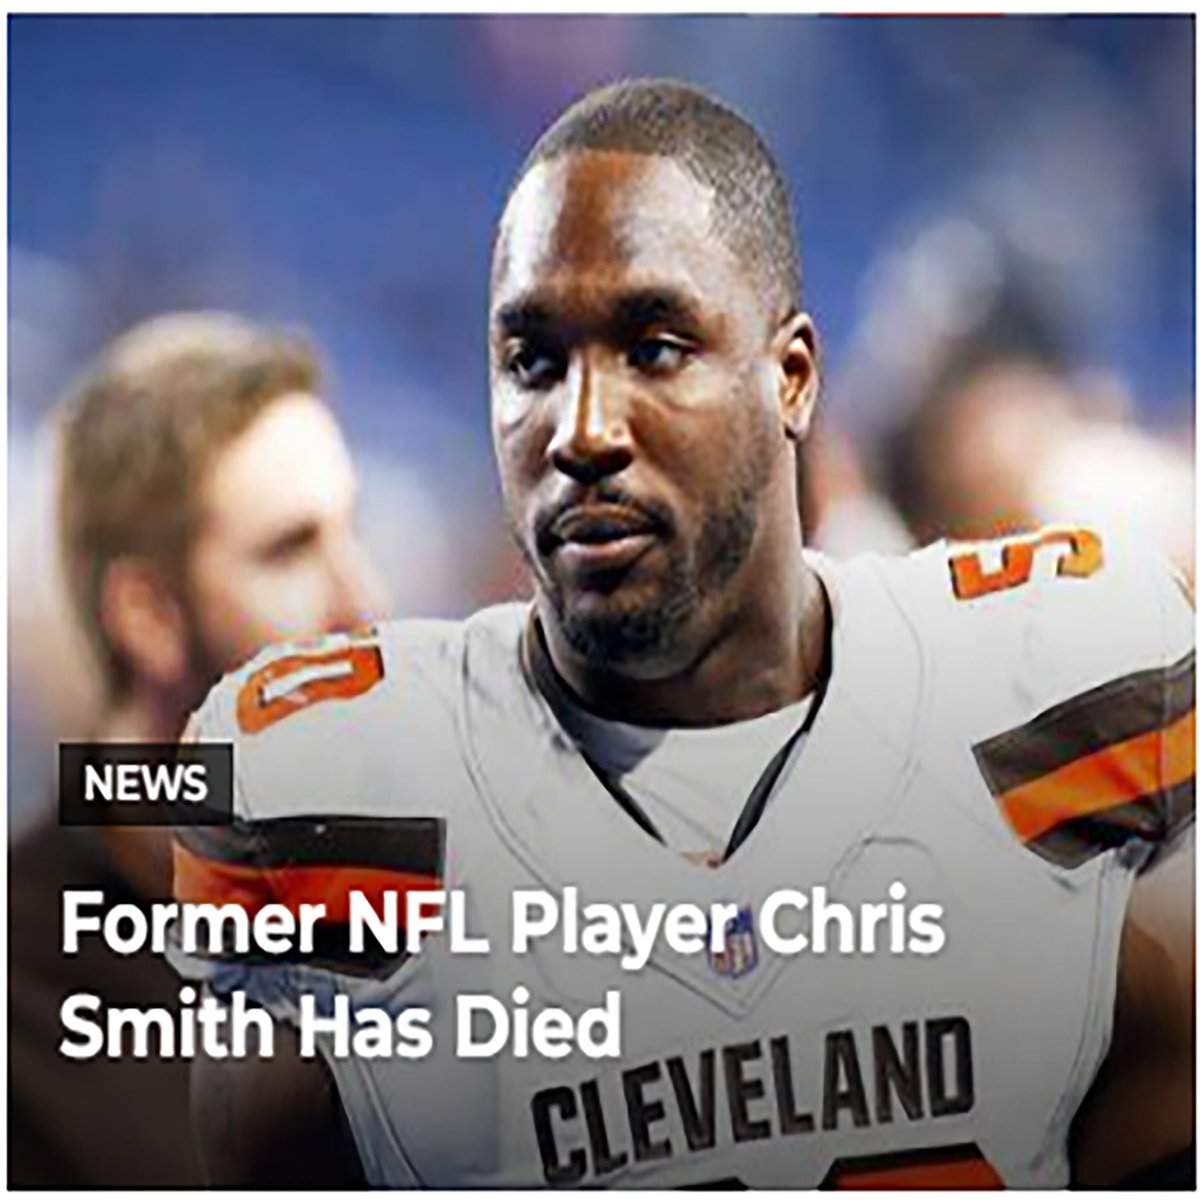 Former NFL Player Chris Smith Has Died 

To read more visit AccessUnlocked.com

#NFL #chrissmith #AccessUnlocked #news #media #cleveland #clevelandbrowns #football #marketing #promo #branding